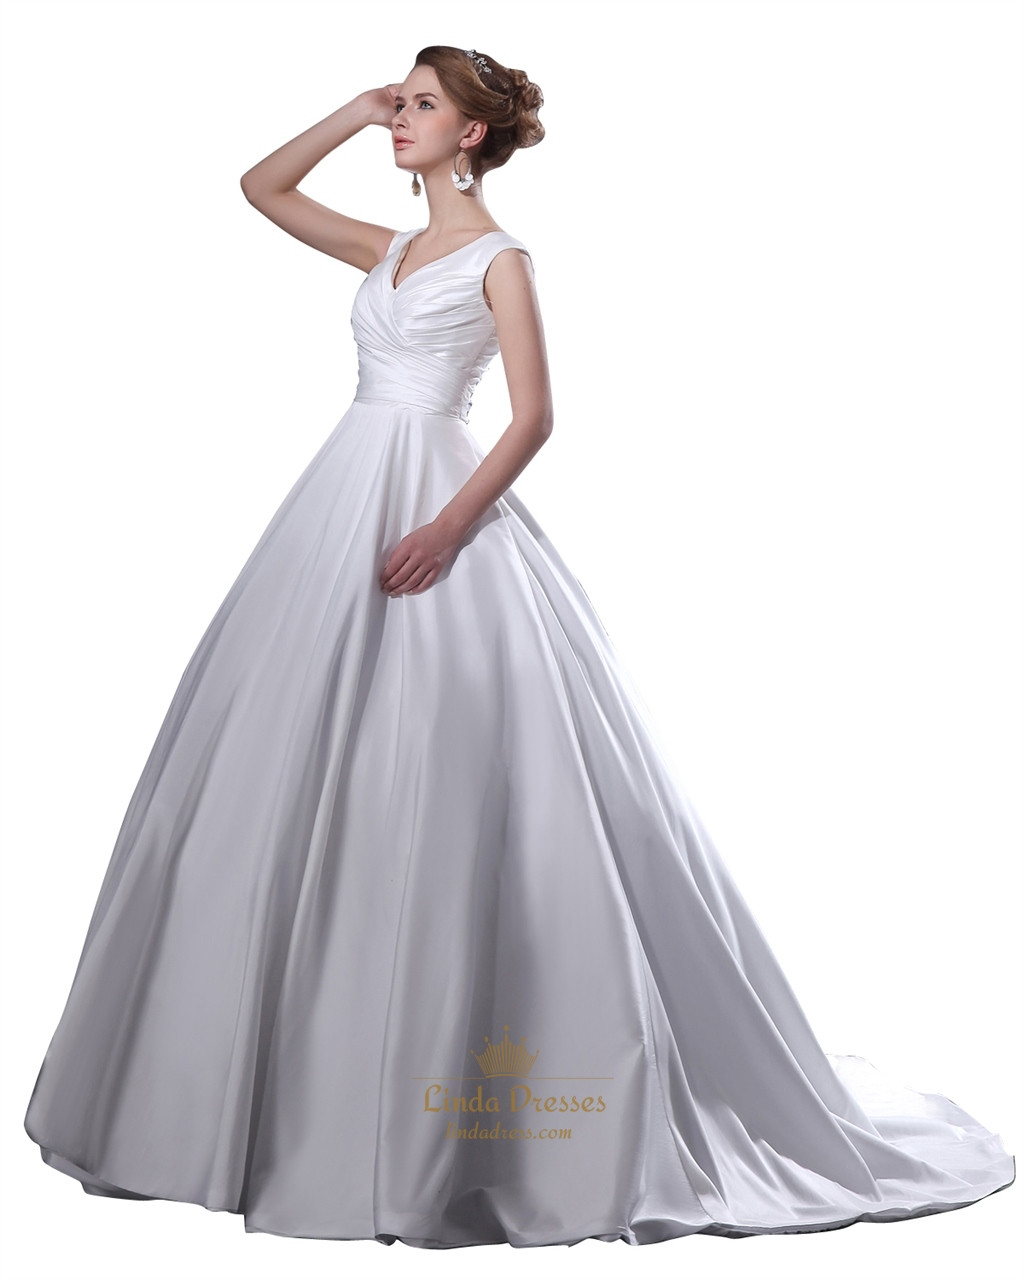 White Ball Gown Wedding Dresses
 Beautiful White V Neck Ruched Bodice Princess Ball Gown